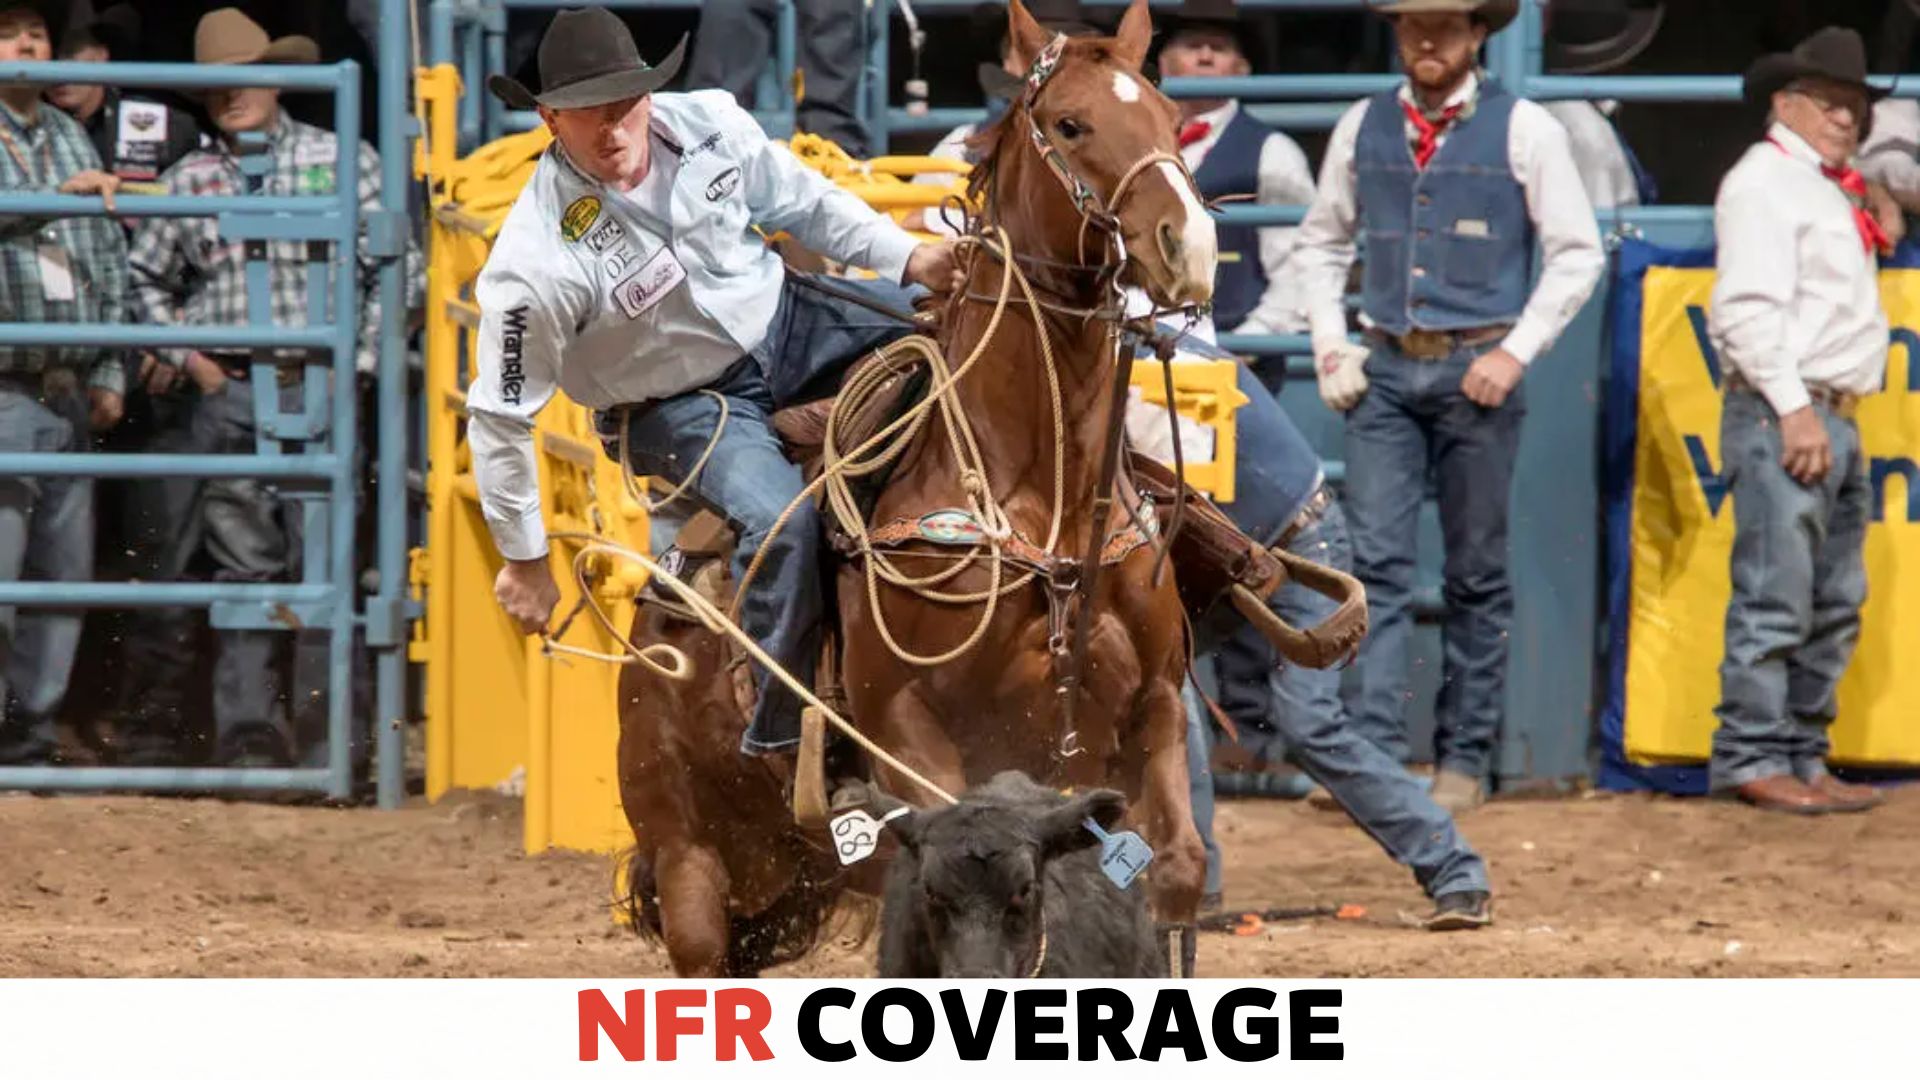 Do Nfr Contestants Pay Entry Fees